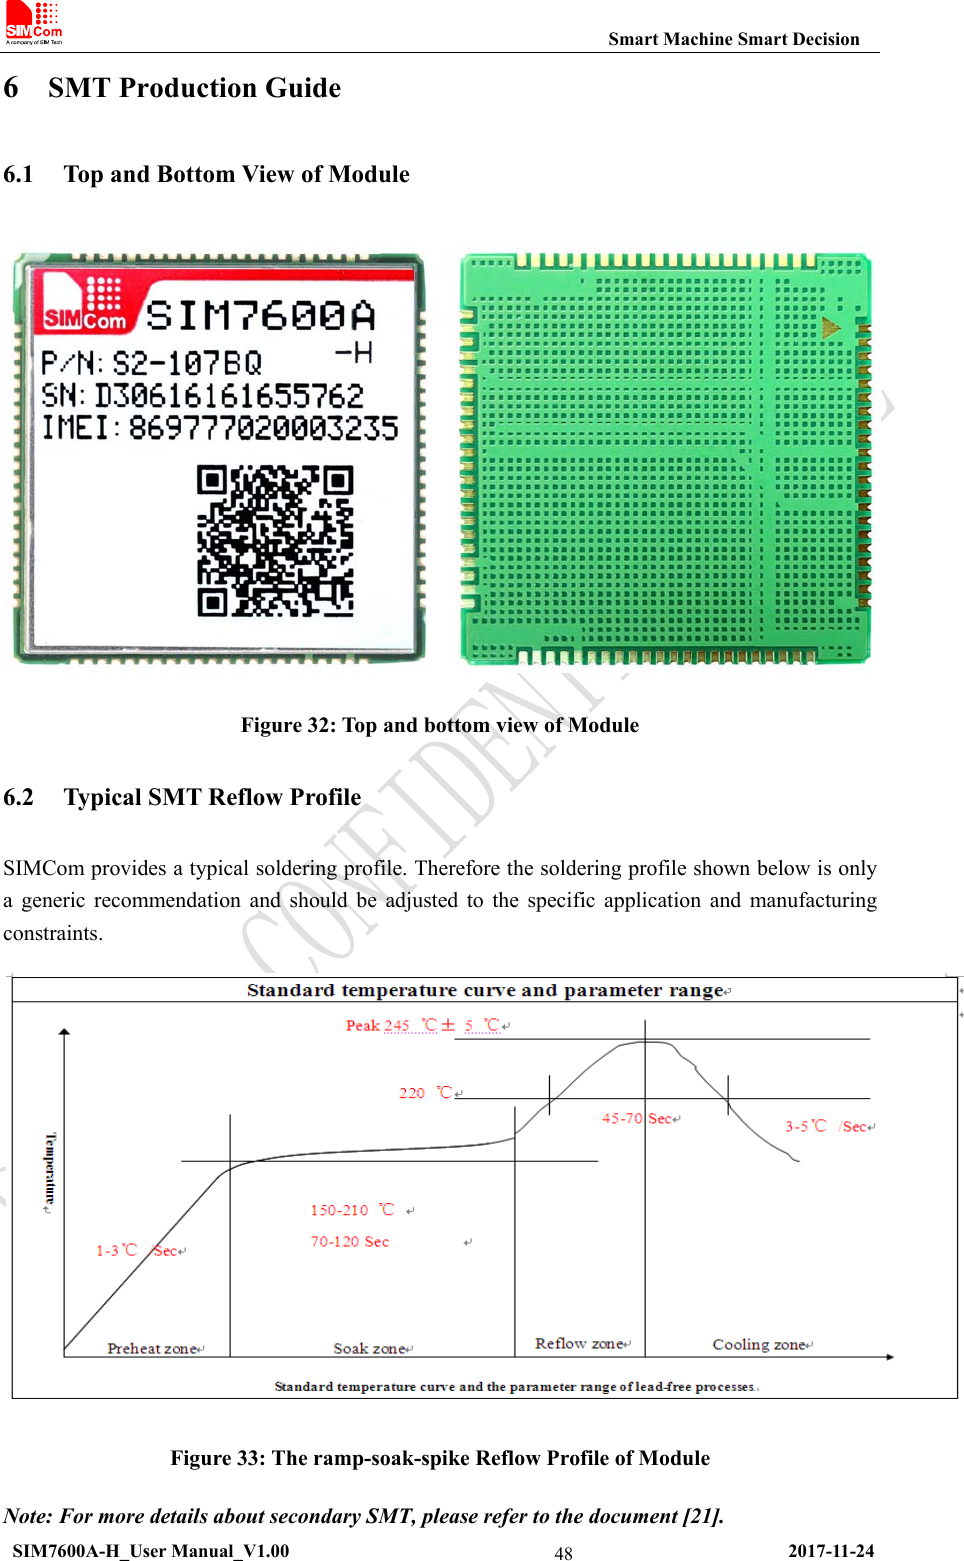                                                           Smart Machine Smart Decision  SIM7600A-H_User Manual_V1.00                                                     2017-11-24 486 SMT Production Guide 6.1 Top and Bottom View of Module  Figure 32: Top and bottom view of Module 6.2 Typical SMT Reflow Profile SIMCom provides a typical soldering profile. Therefore the soldering profile shown below is only a generic recommendation and should be adjusted to the specific application and manufacturing constraints.  Figure 33: The ramp-soak-spike Reflow Profile of Module Note: For more details about secondary SMT, please refer to the document [21]. 